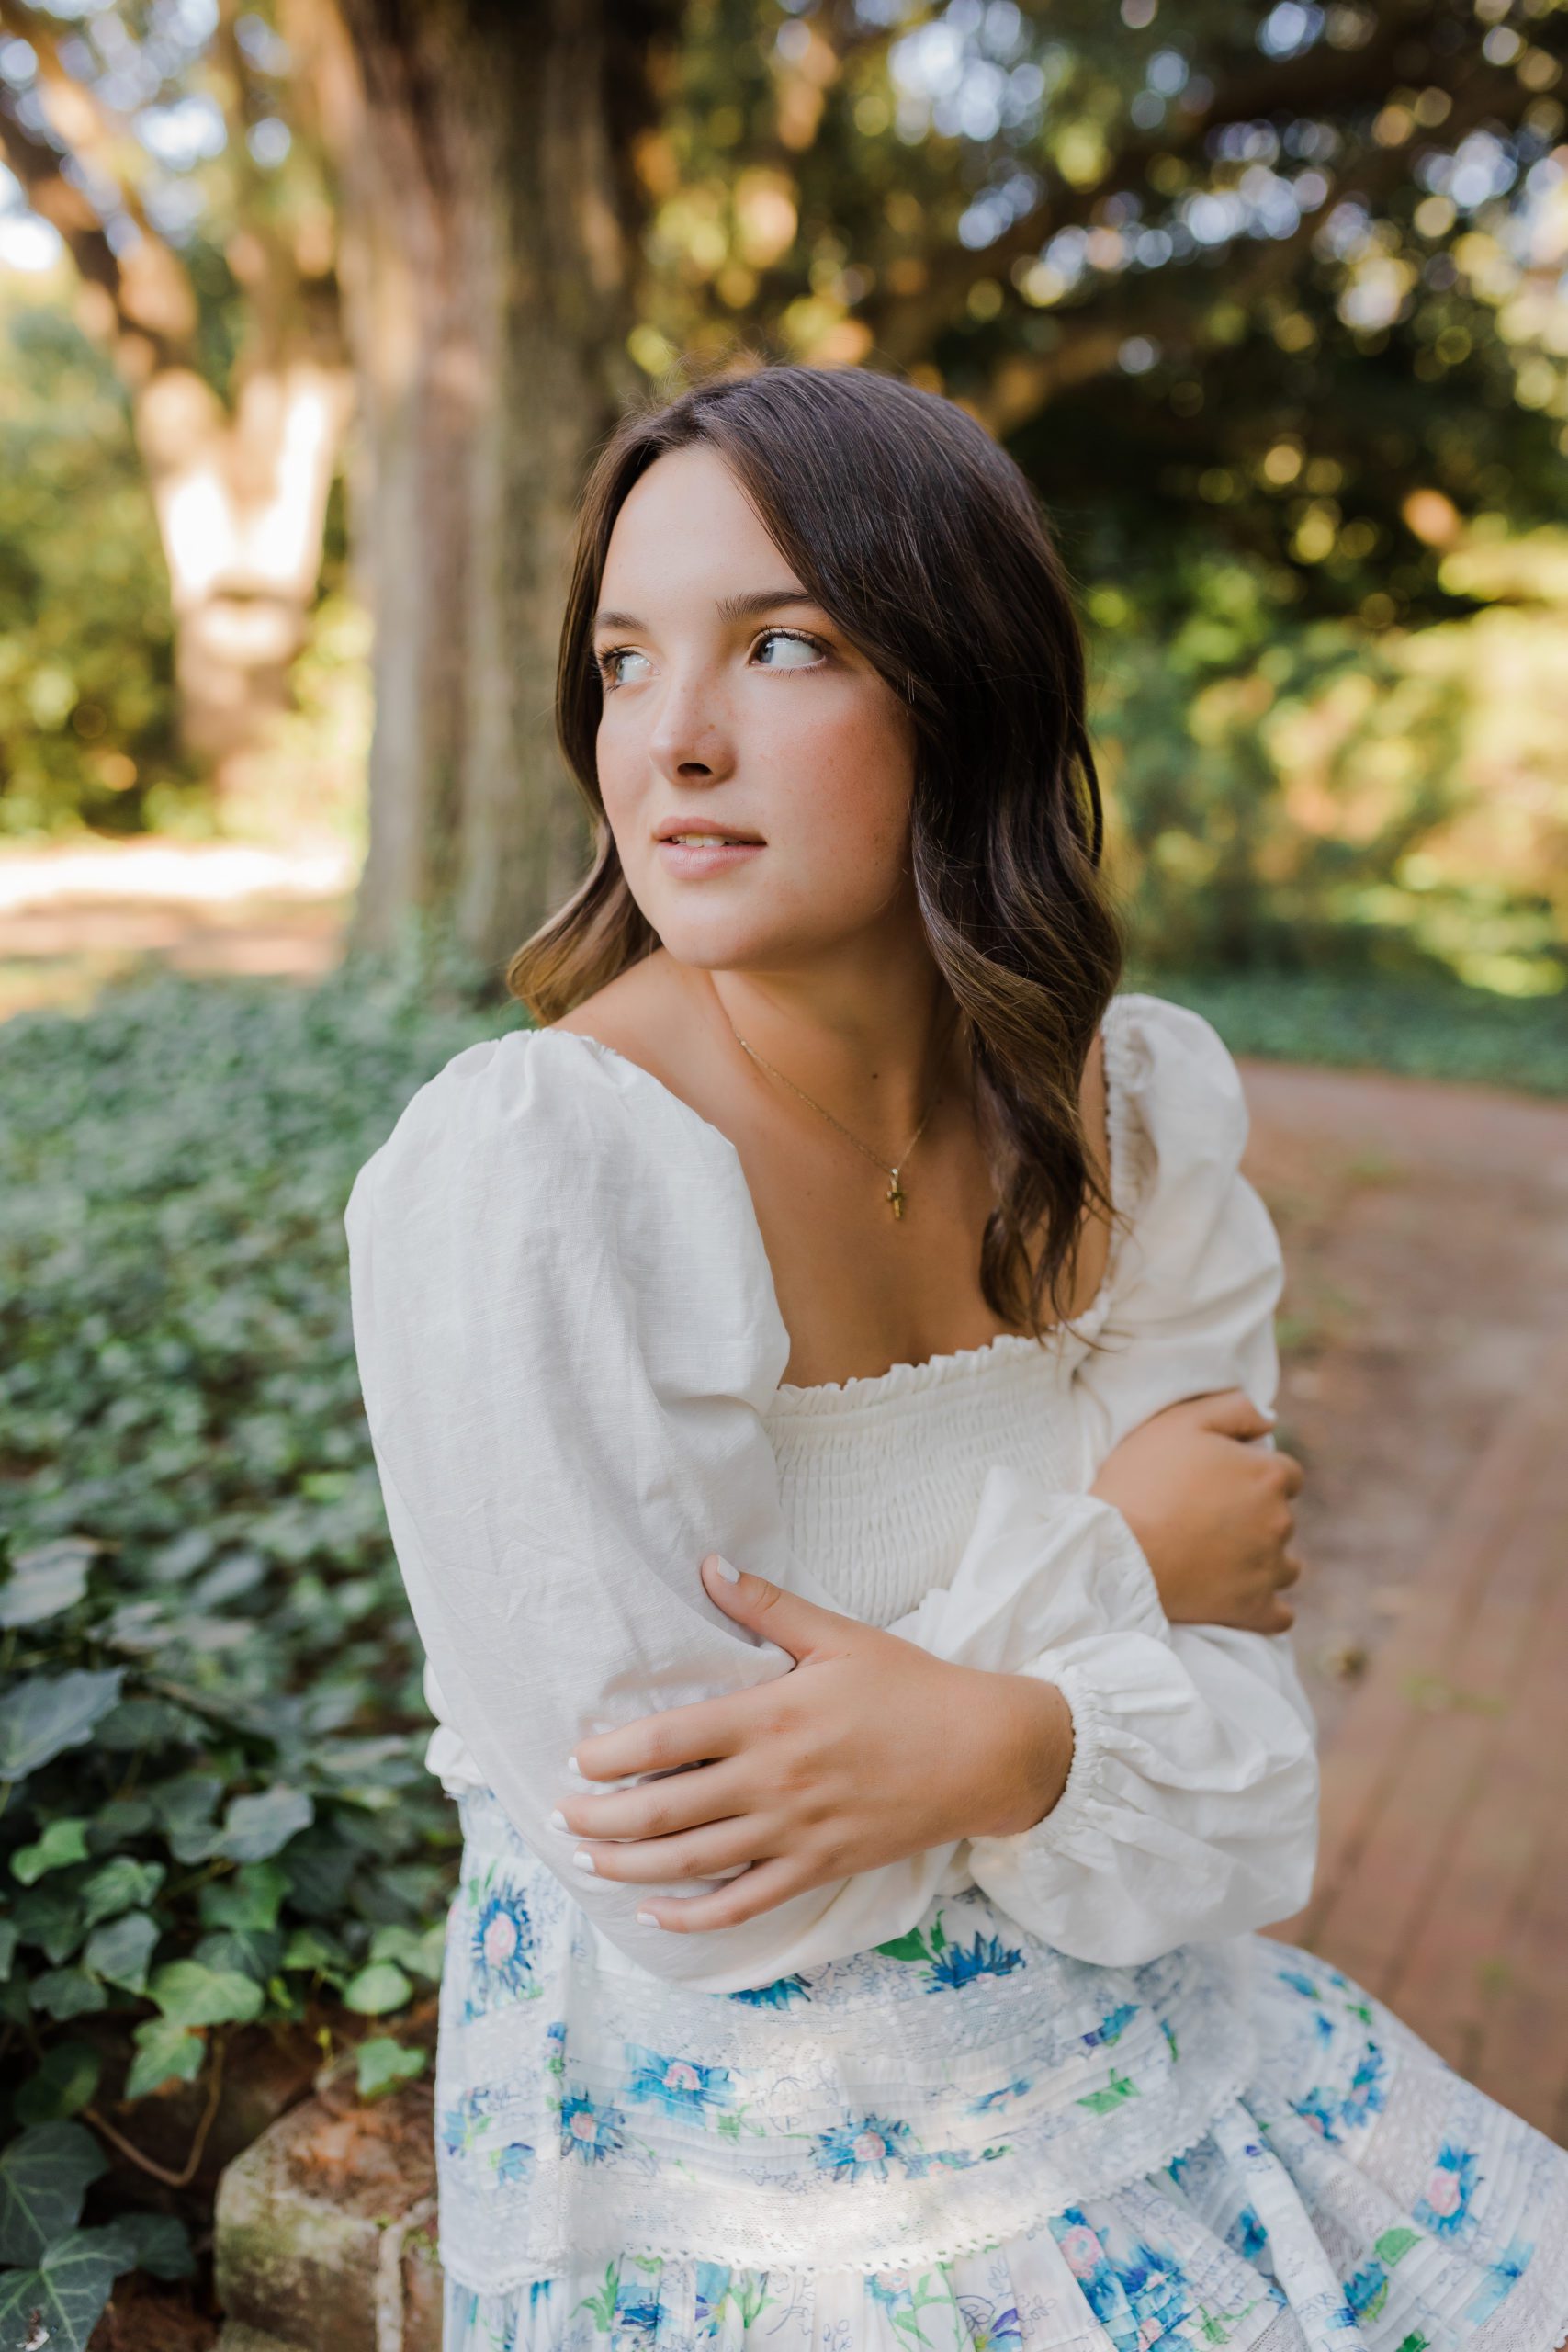 Augusta photographer captures senior pictures with girl in a white top in a garden for her outdoor senior pictures 